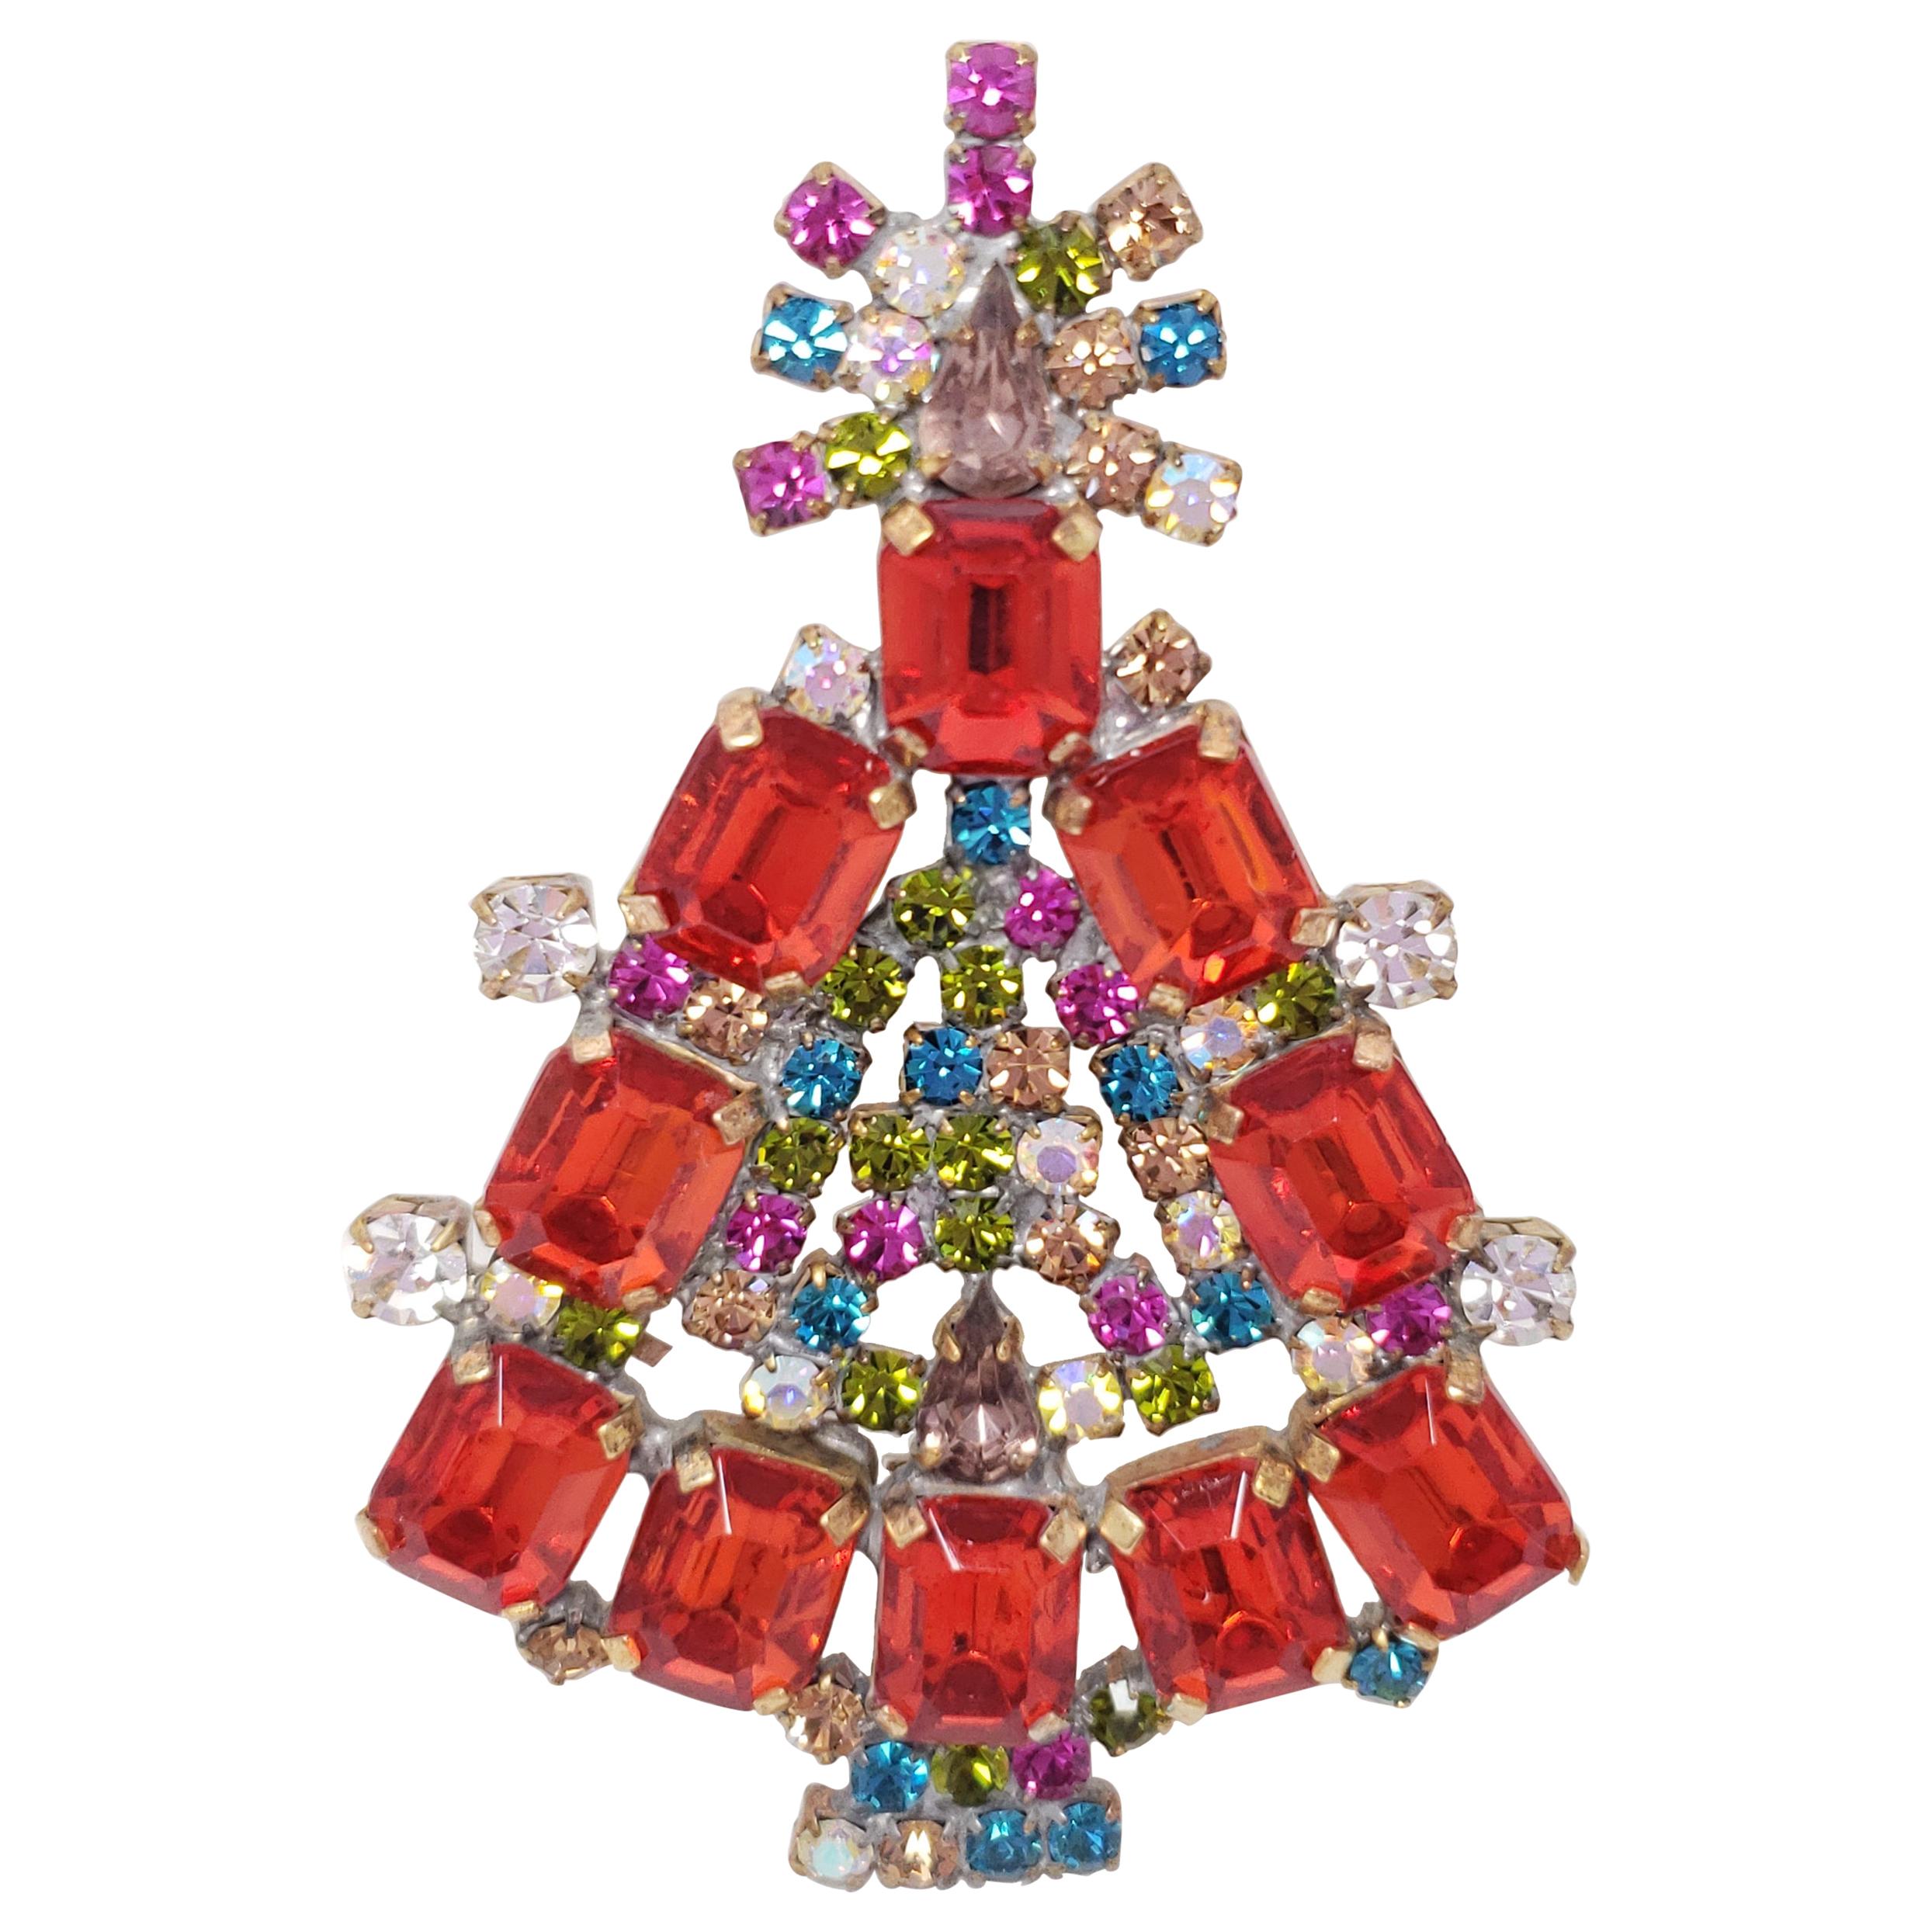 Husar D Czech Jeweled Holiday Christmas Tree Pin Brooch, Ruby, Multicolor Crysta